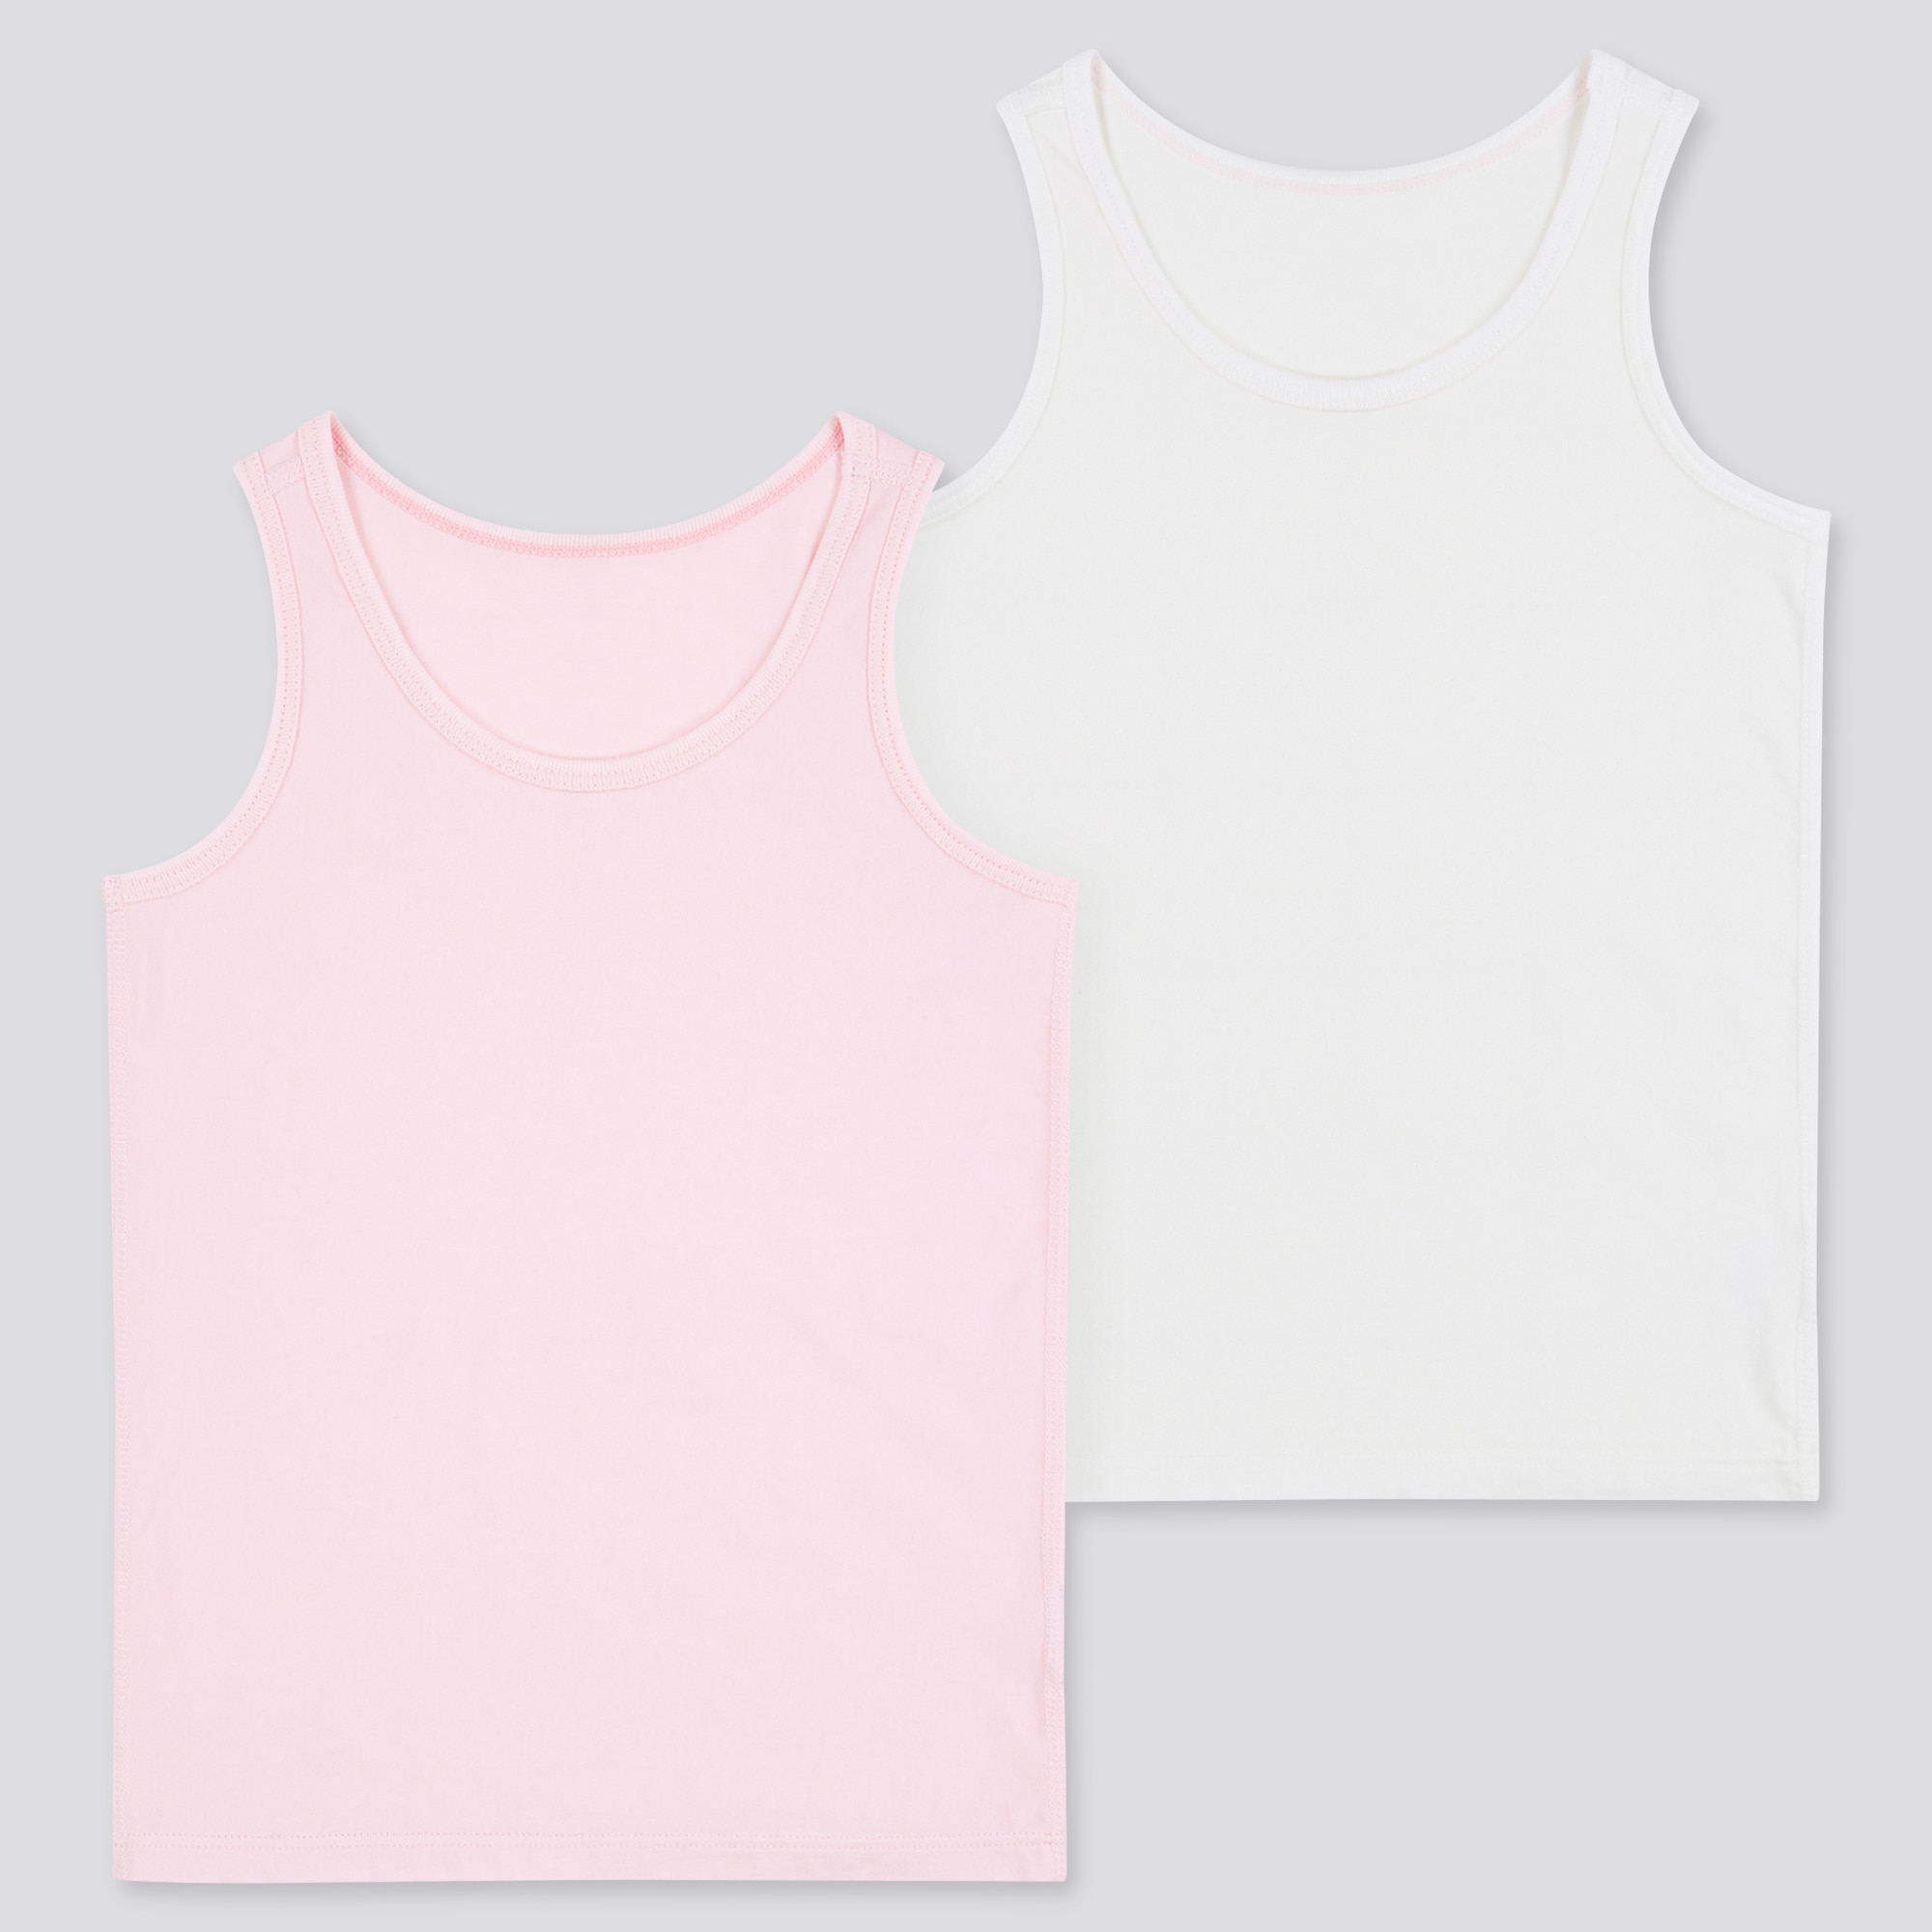 WOMENS AIRISM RACER BACK TANK TOP  UNIQLO PH